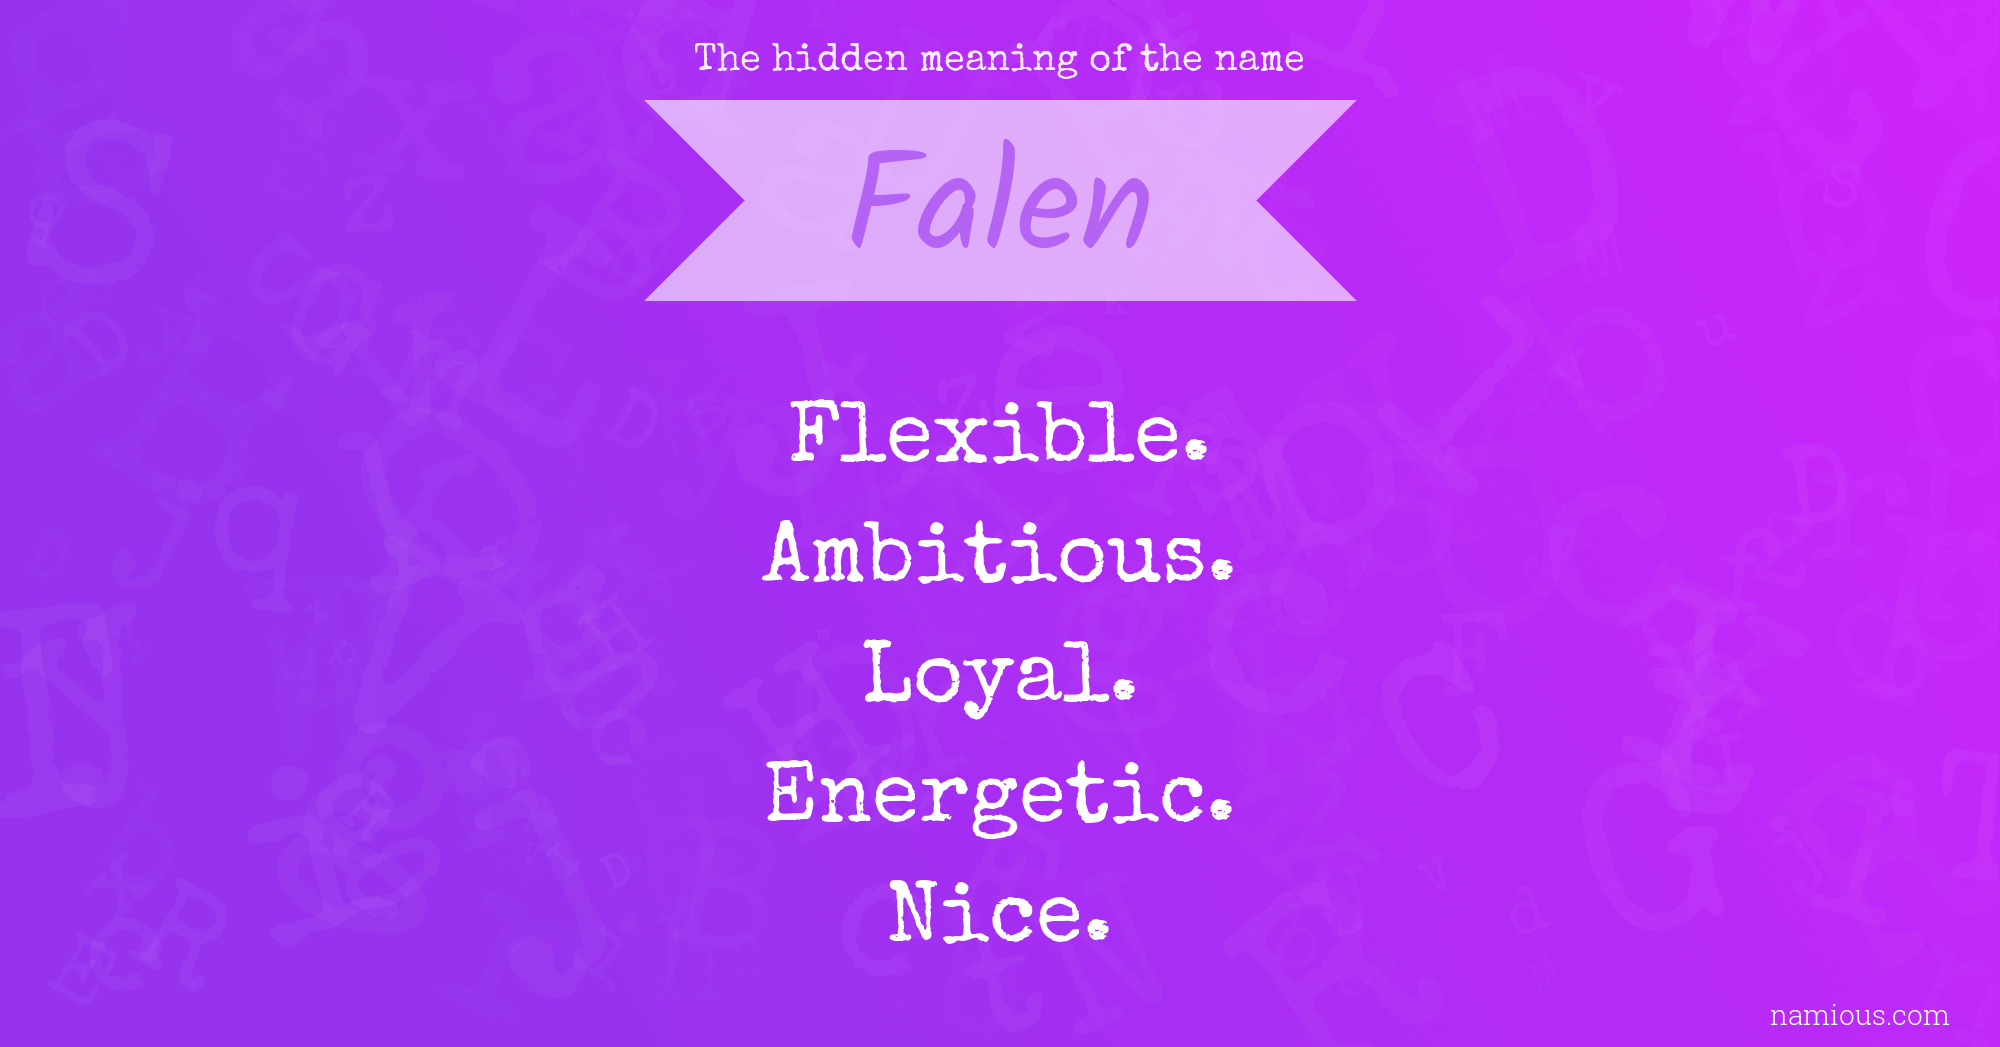 The hidden meaning of the name Falen